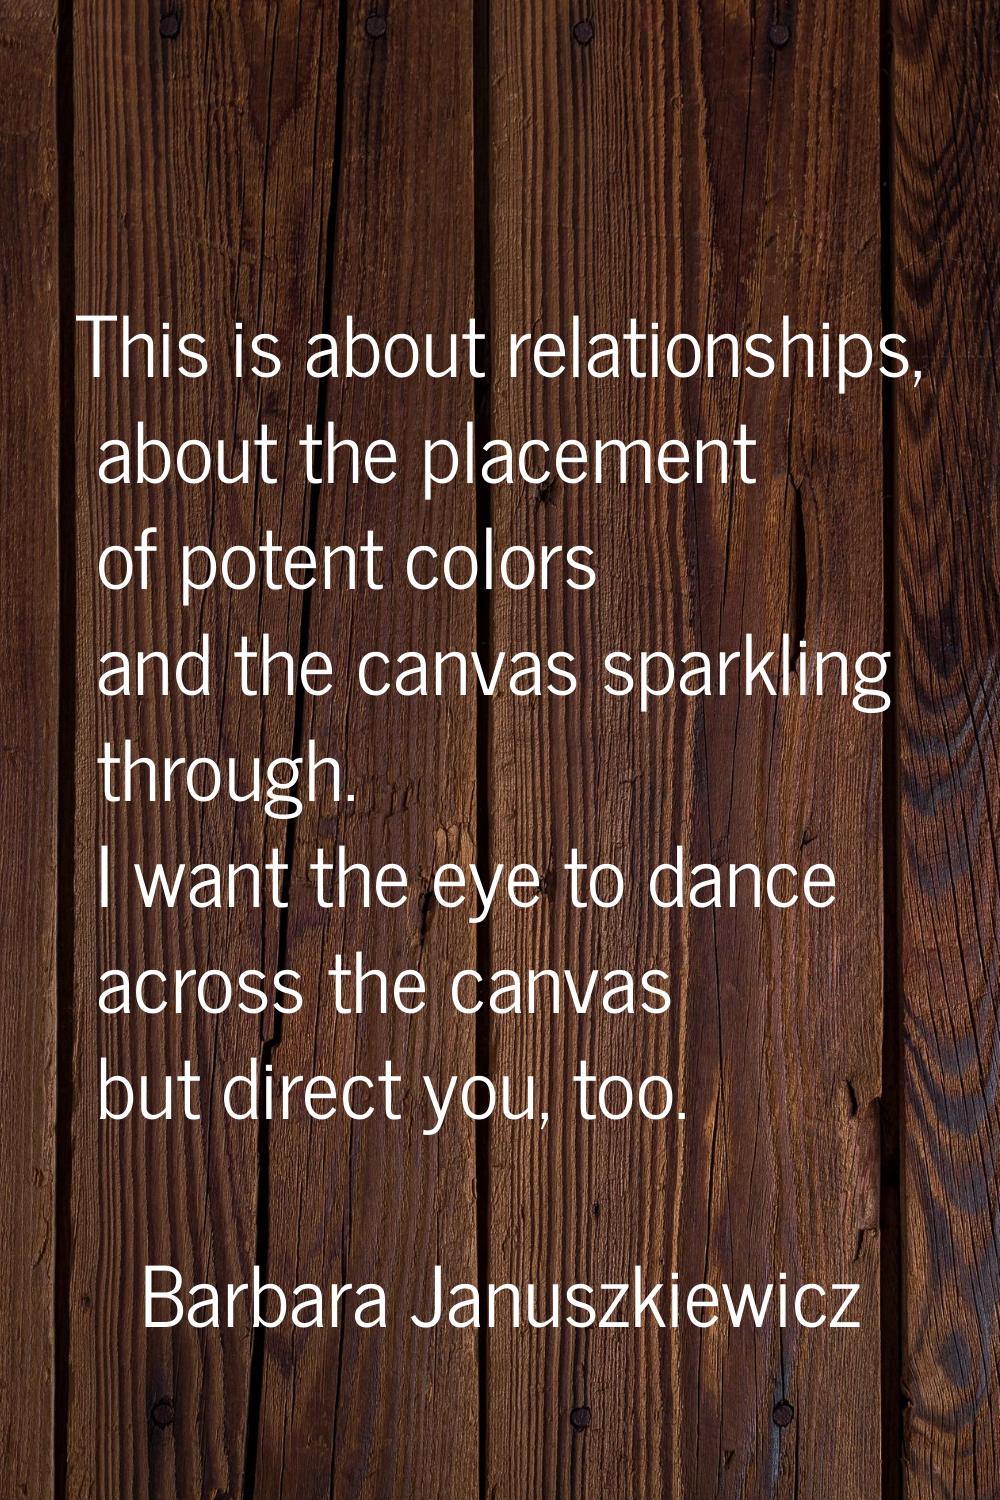 This is about relationships, about the placement of potent colors and the canvas sparkling through.